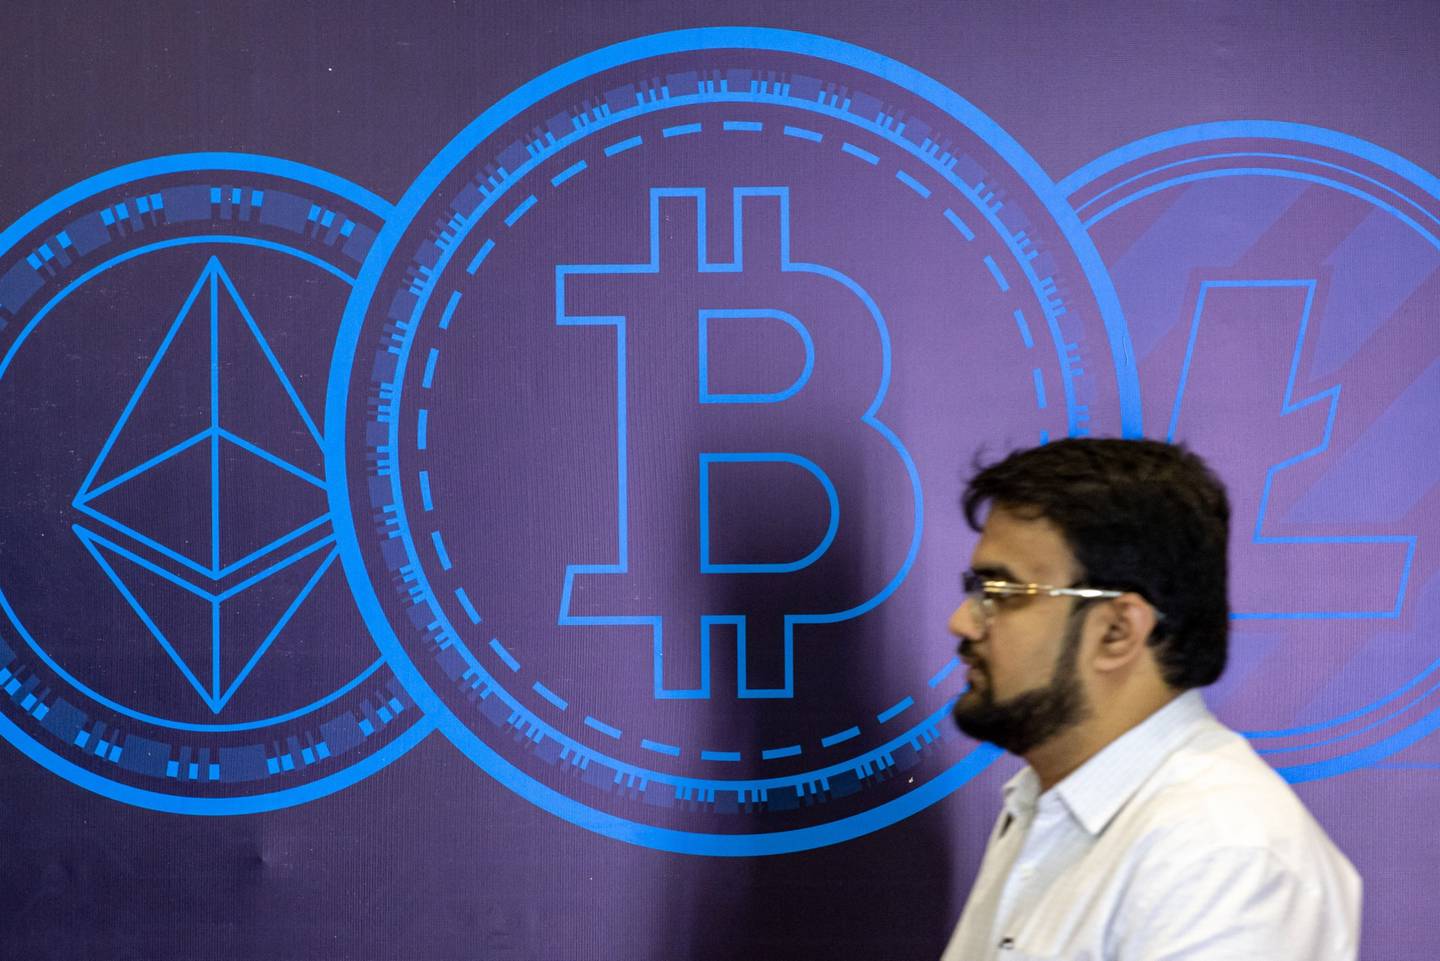 The Ethereum, left, Bitcoin, center, and Litecoin logos on an event board during the Dubai Crypto Expo at the Festival Arena in Dubai, United Arab Emirates, on Wednesday, Oct. 5, 2022.